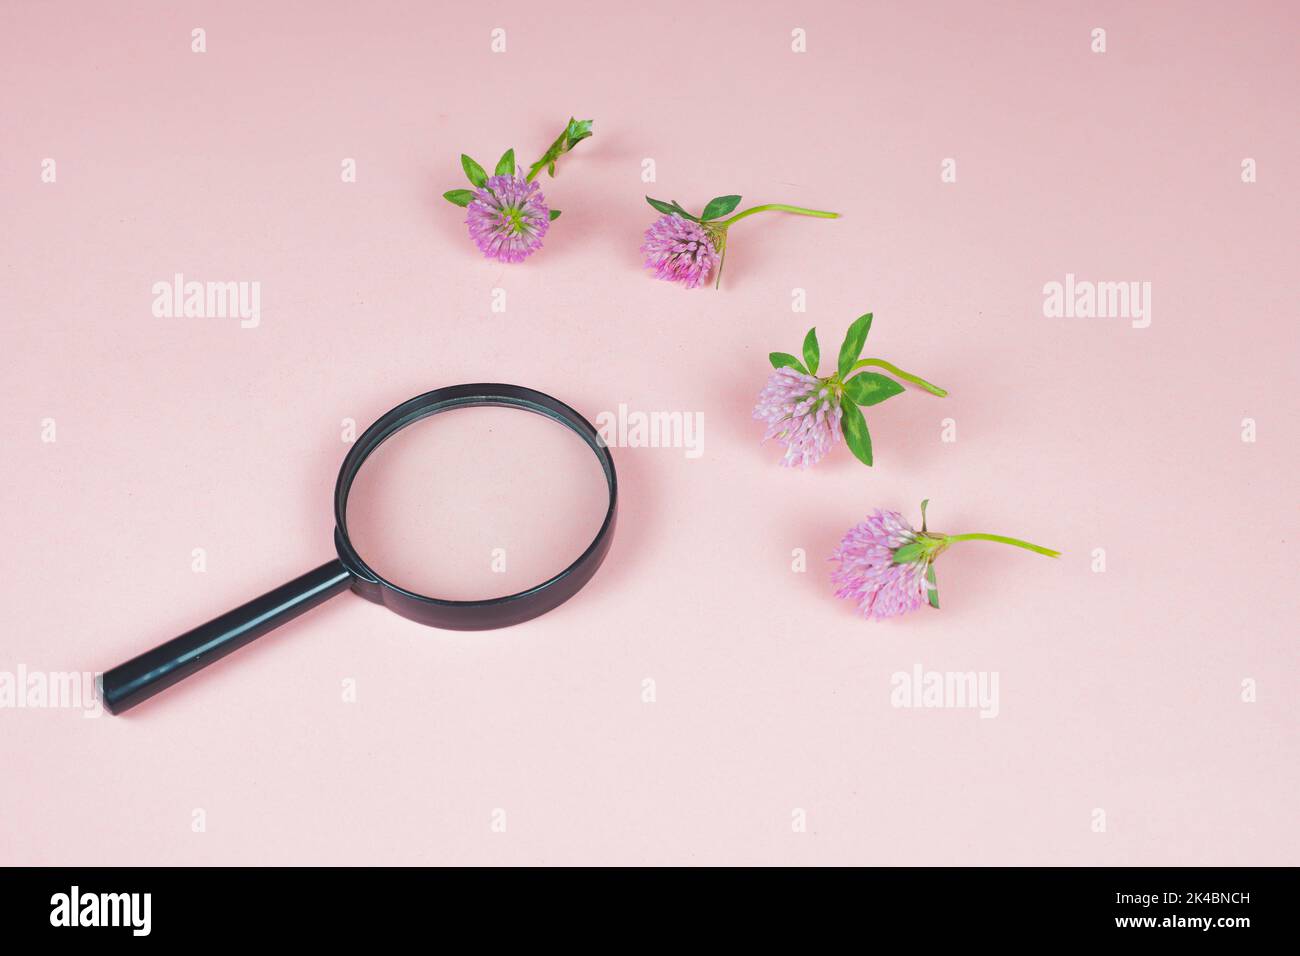 Magnifying glass on the pink background surrounded by red clover flowers. Medicinal herbs ready to examining, identifying and researching. Magnifier. Stock Photo